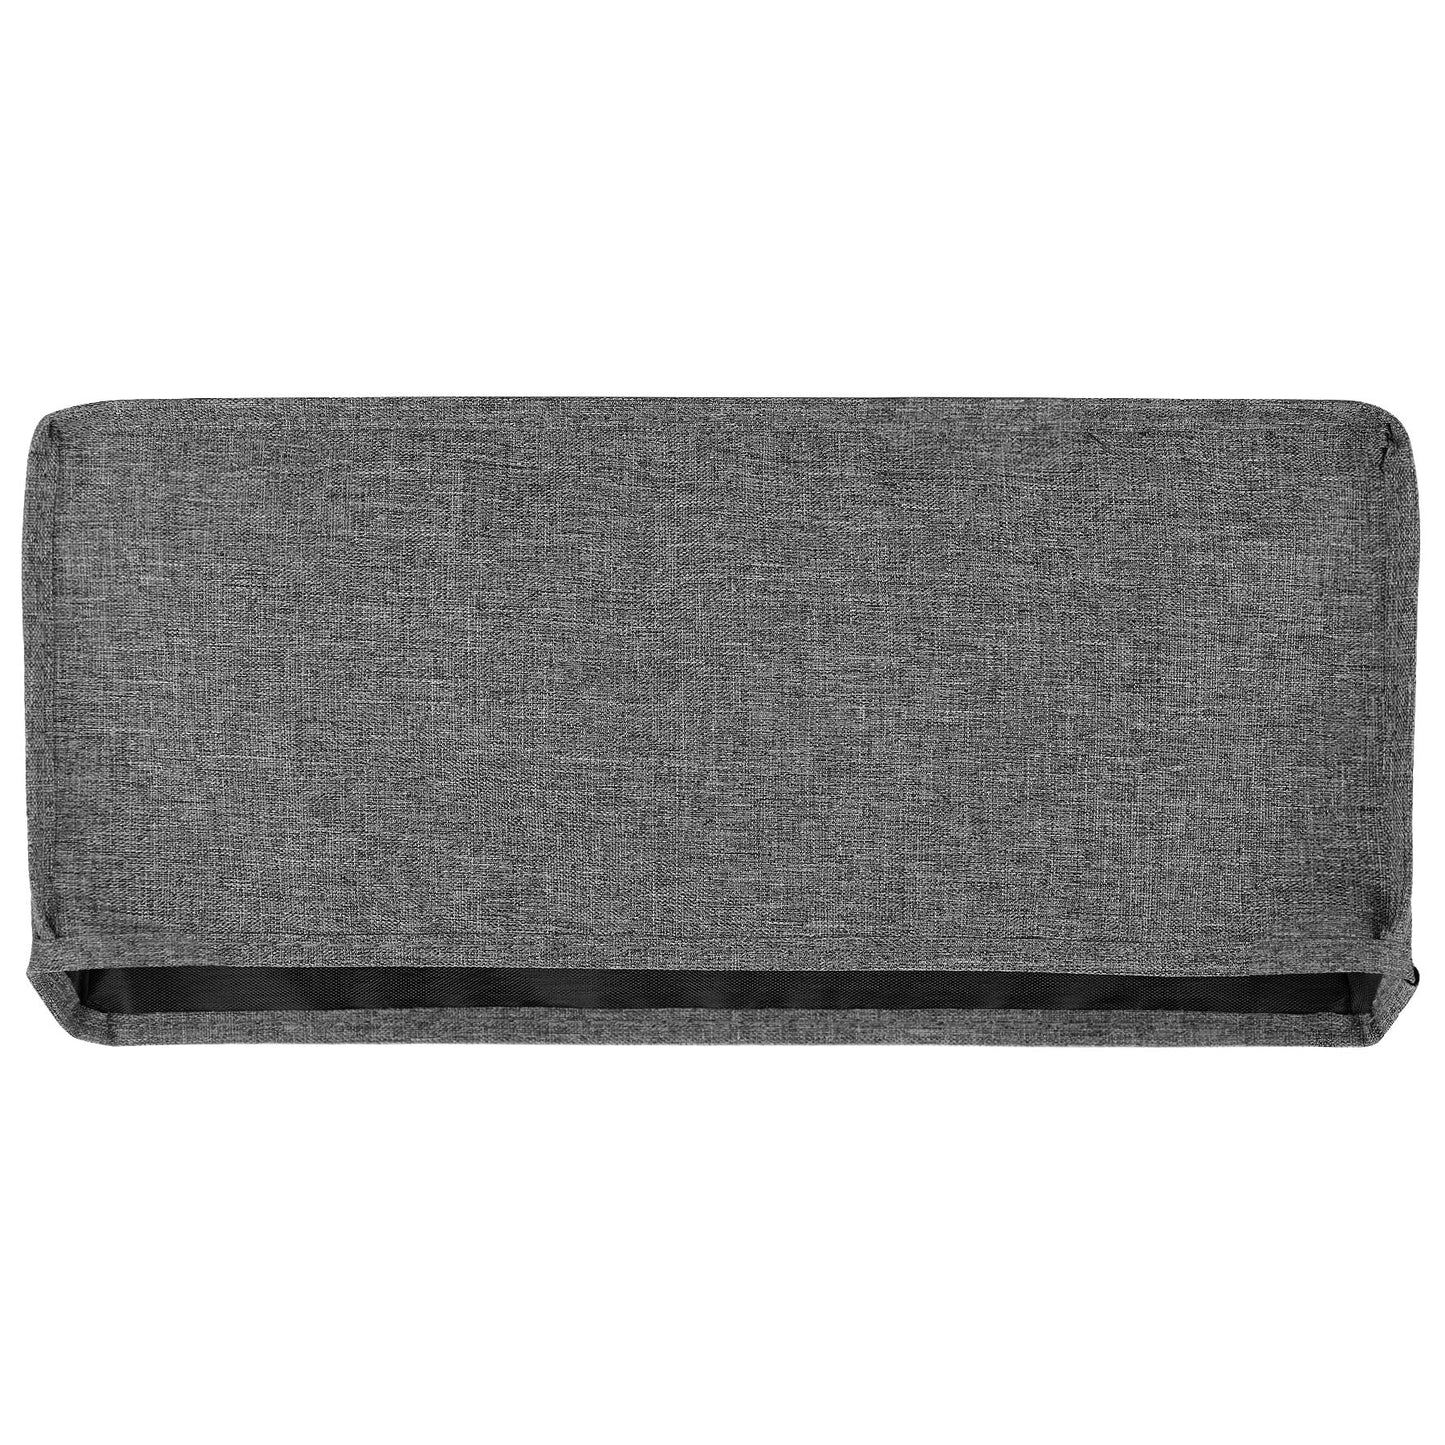 PlayVital Soft Neat Lining Dust Cover for Steam Deck - Gray - PCSDM002 PlayVital